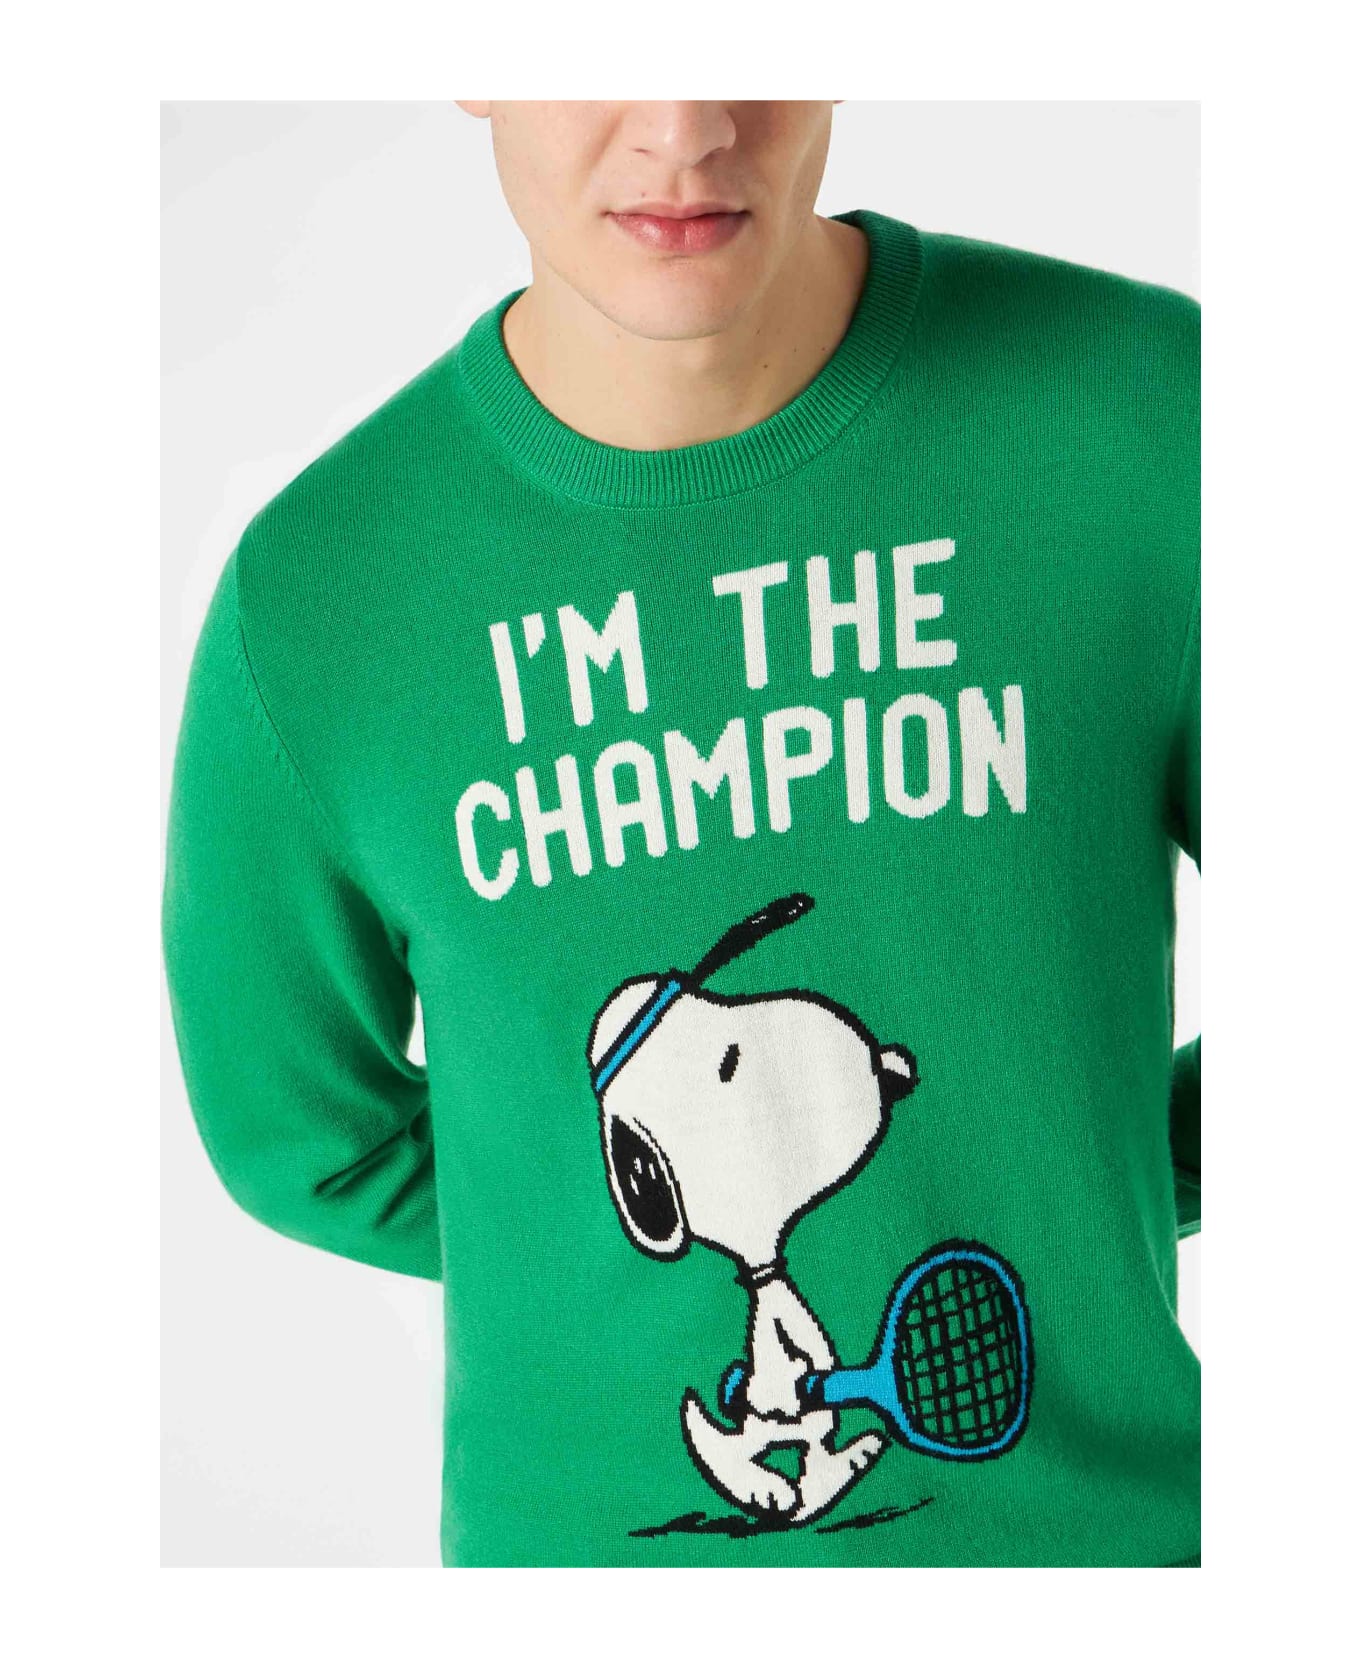 MC2 Saint Barth Man Lighweight Sweater With Snoopy Print | Peanuts Special Edition - GREEN